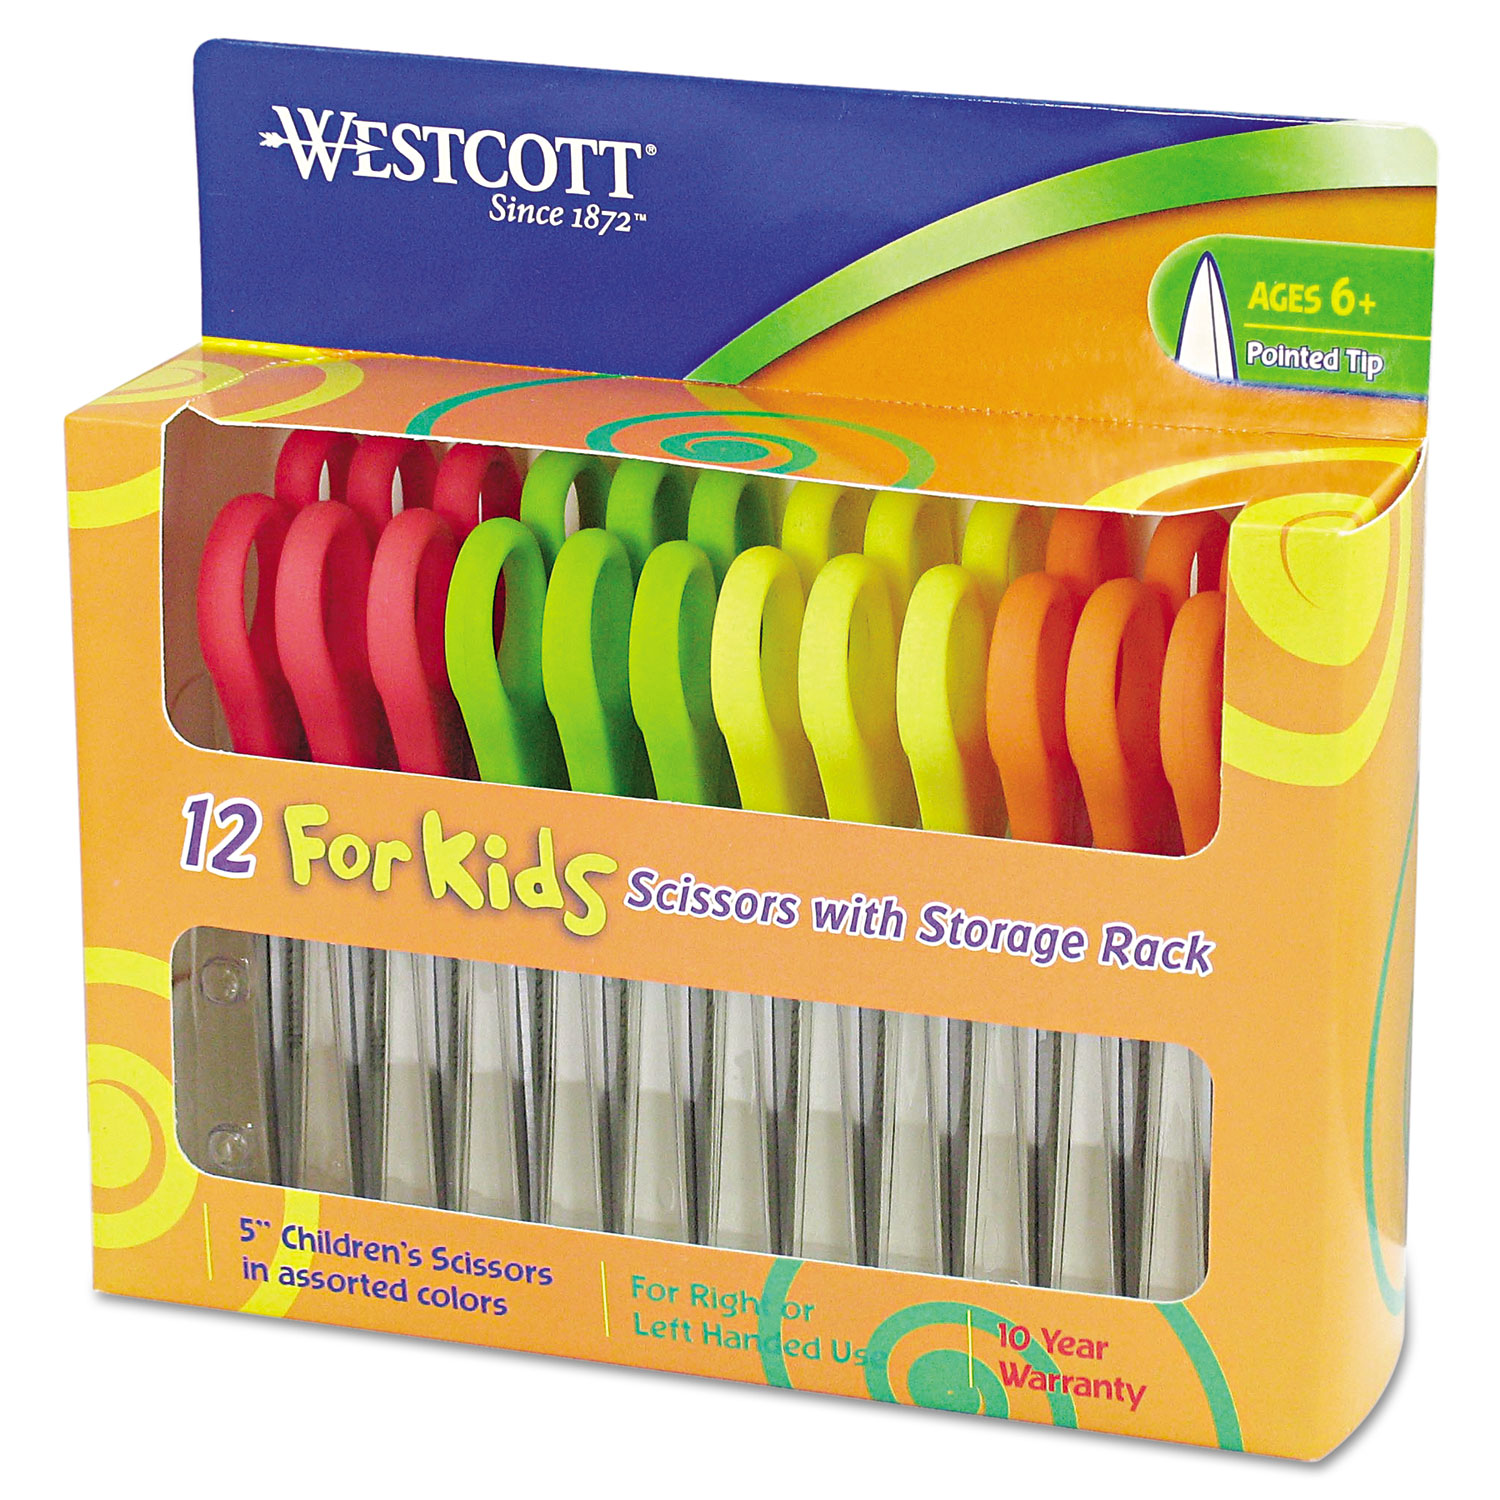  Westcott 13141 For Kids Scissors, Pointed Tip, 5 Long, 1.75 Cut Length, Assorted Straight Handles, 12/Pack (ACM13141) 